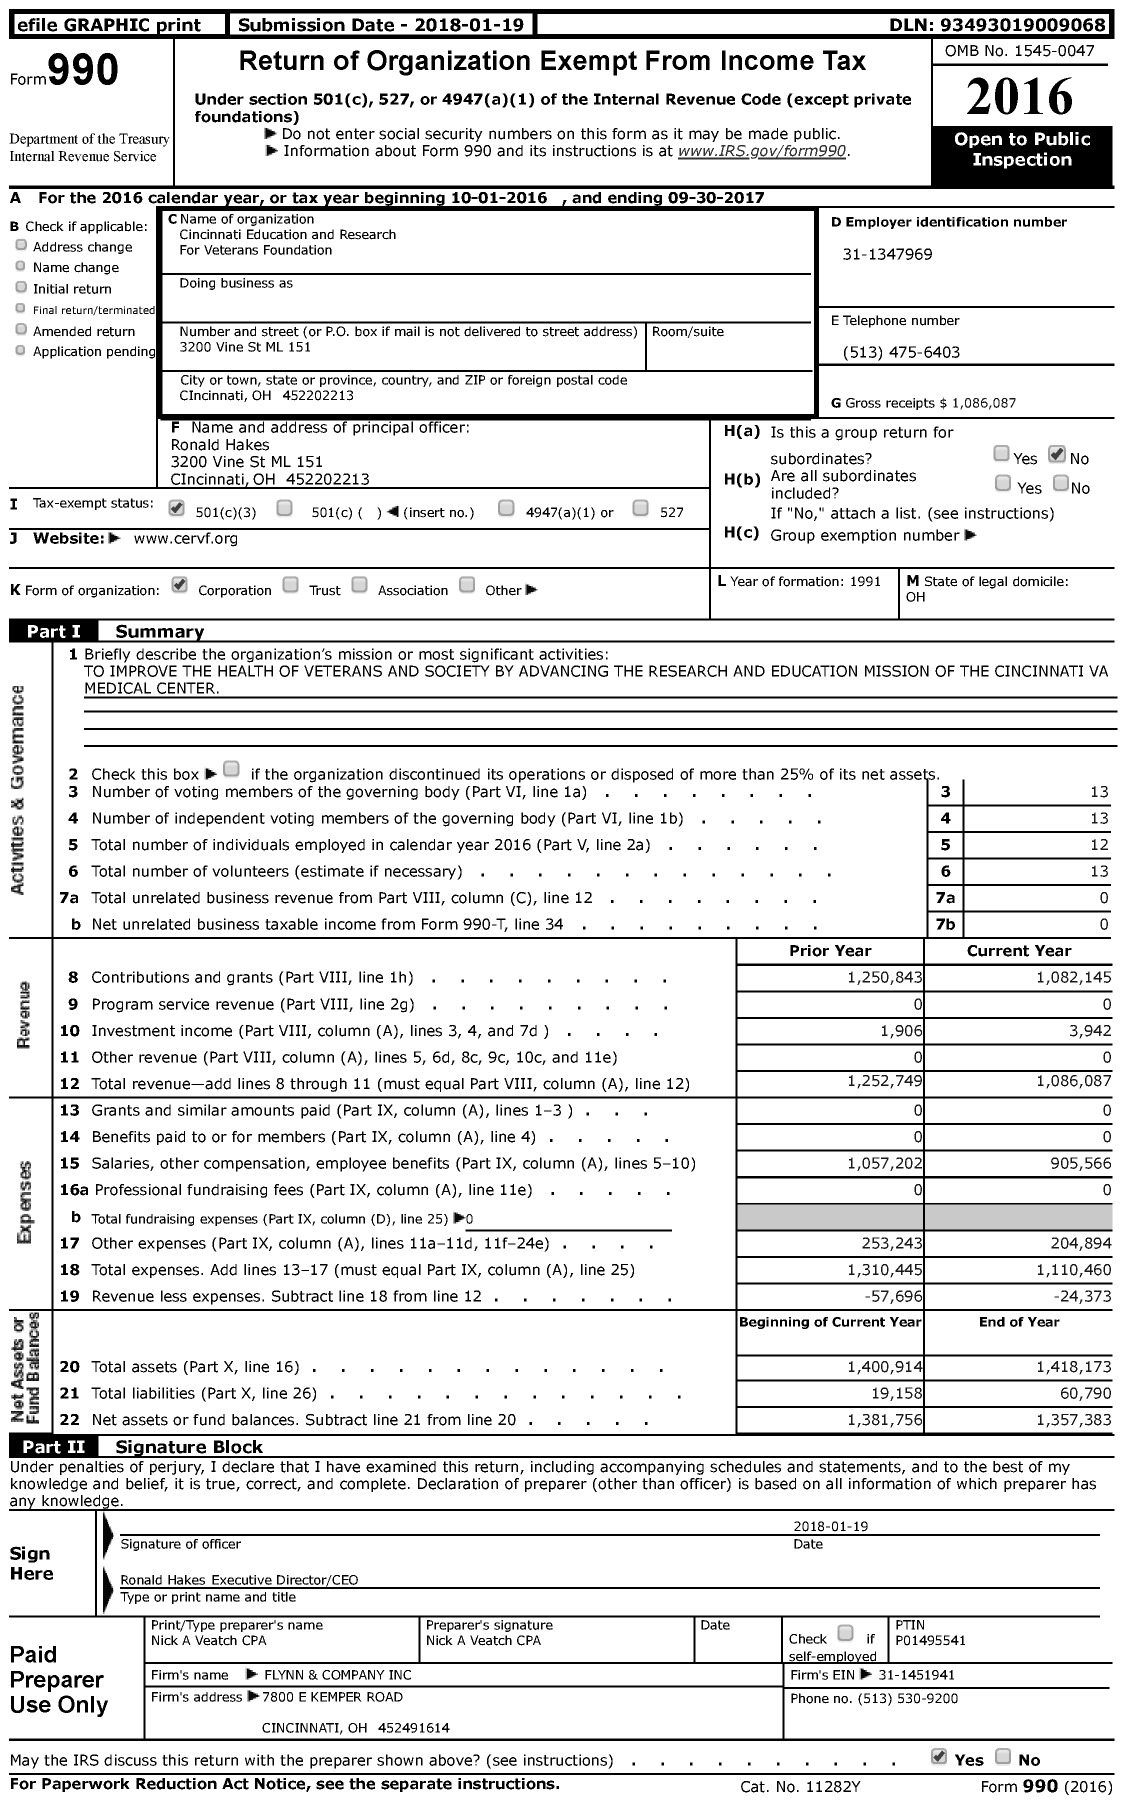 Image of first page of 2016 Form 990 for Cincinnati Education and Research For Veterans Foundation